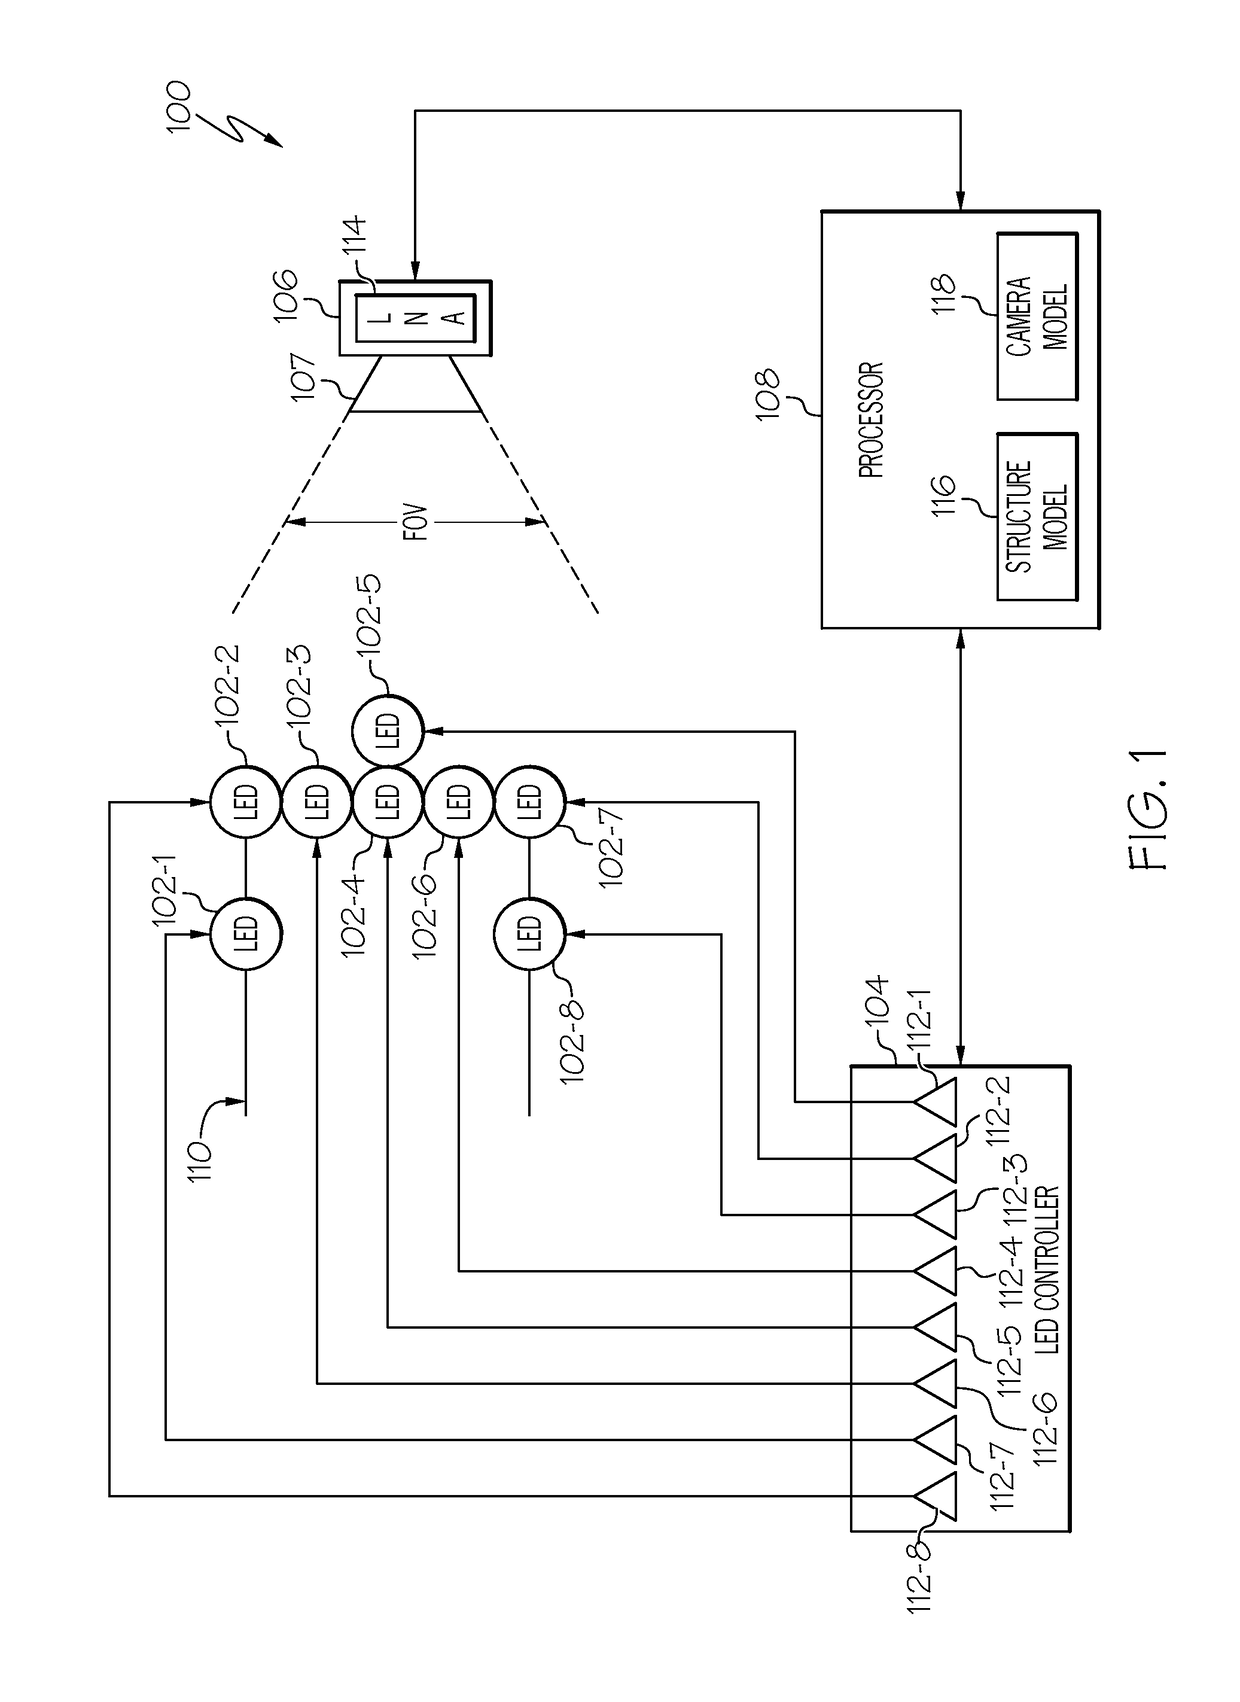 High speed, high precision six degree-of-freedom optical tracker system and method